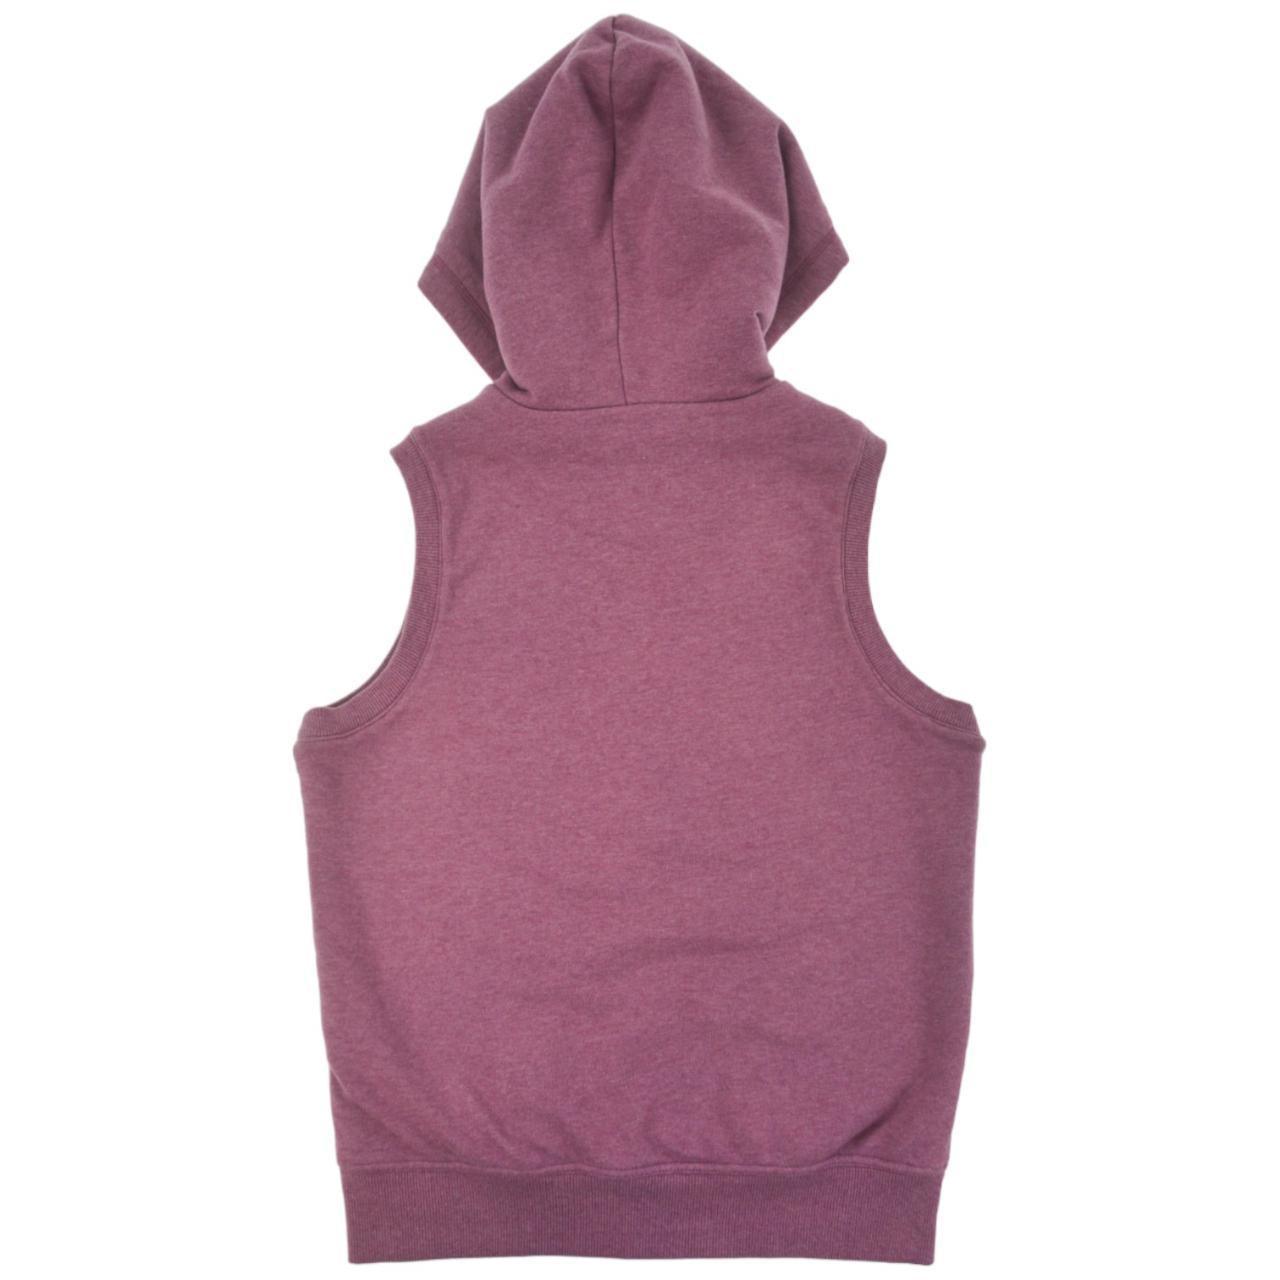 Nike Hooded Vest Woman’s Size M - Known Source